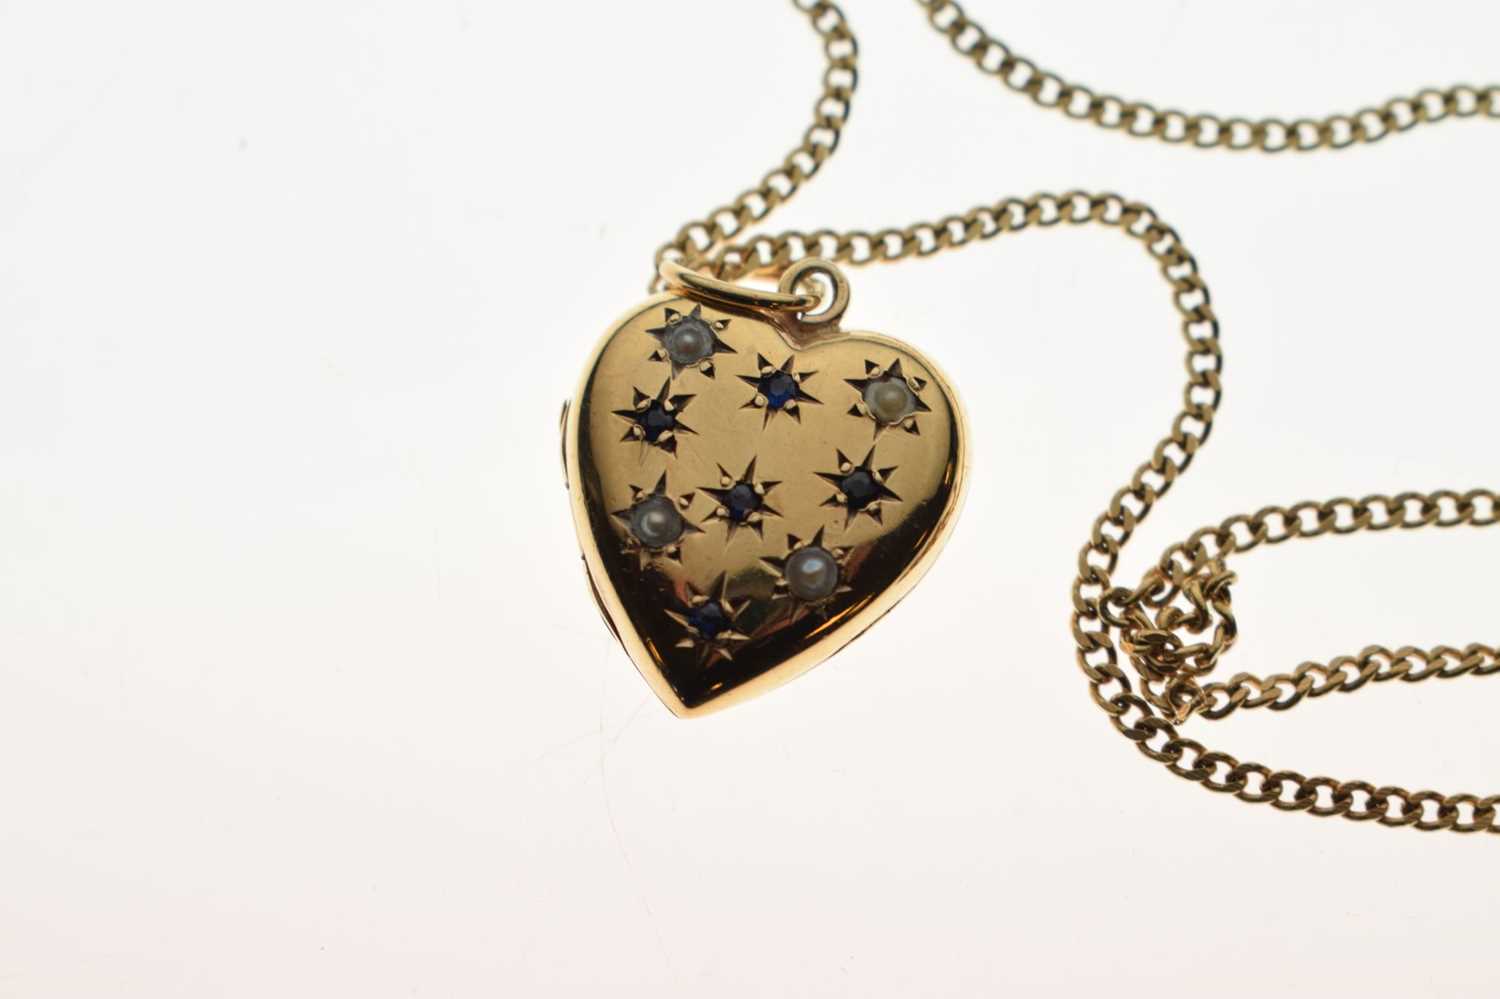 Pearl and sapphire 9ct gold heart-shaped locket pendant necklace - Image 4 of 7